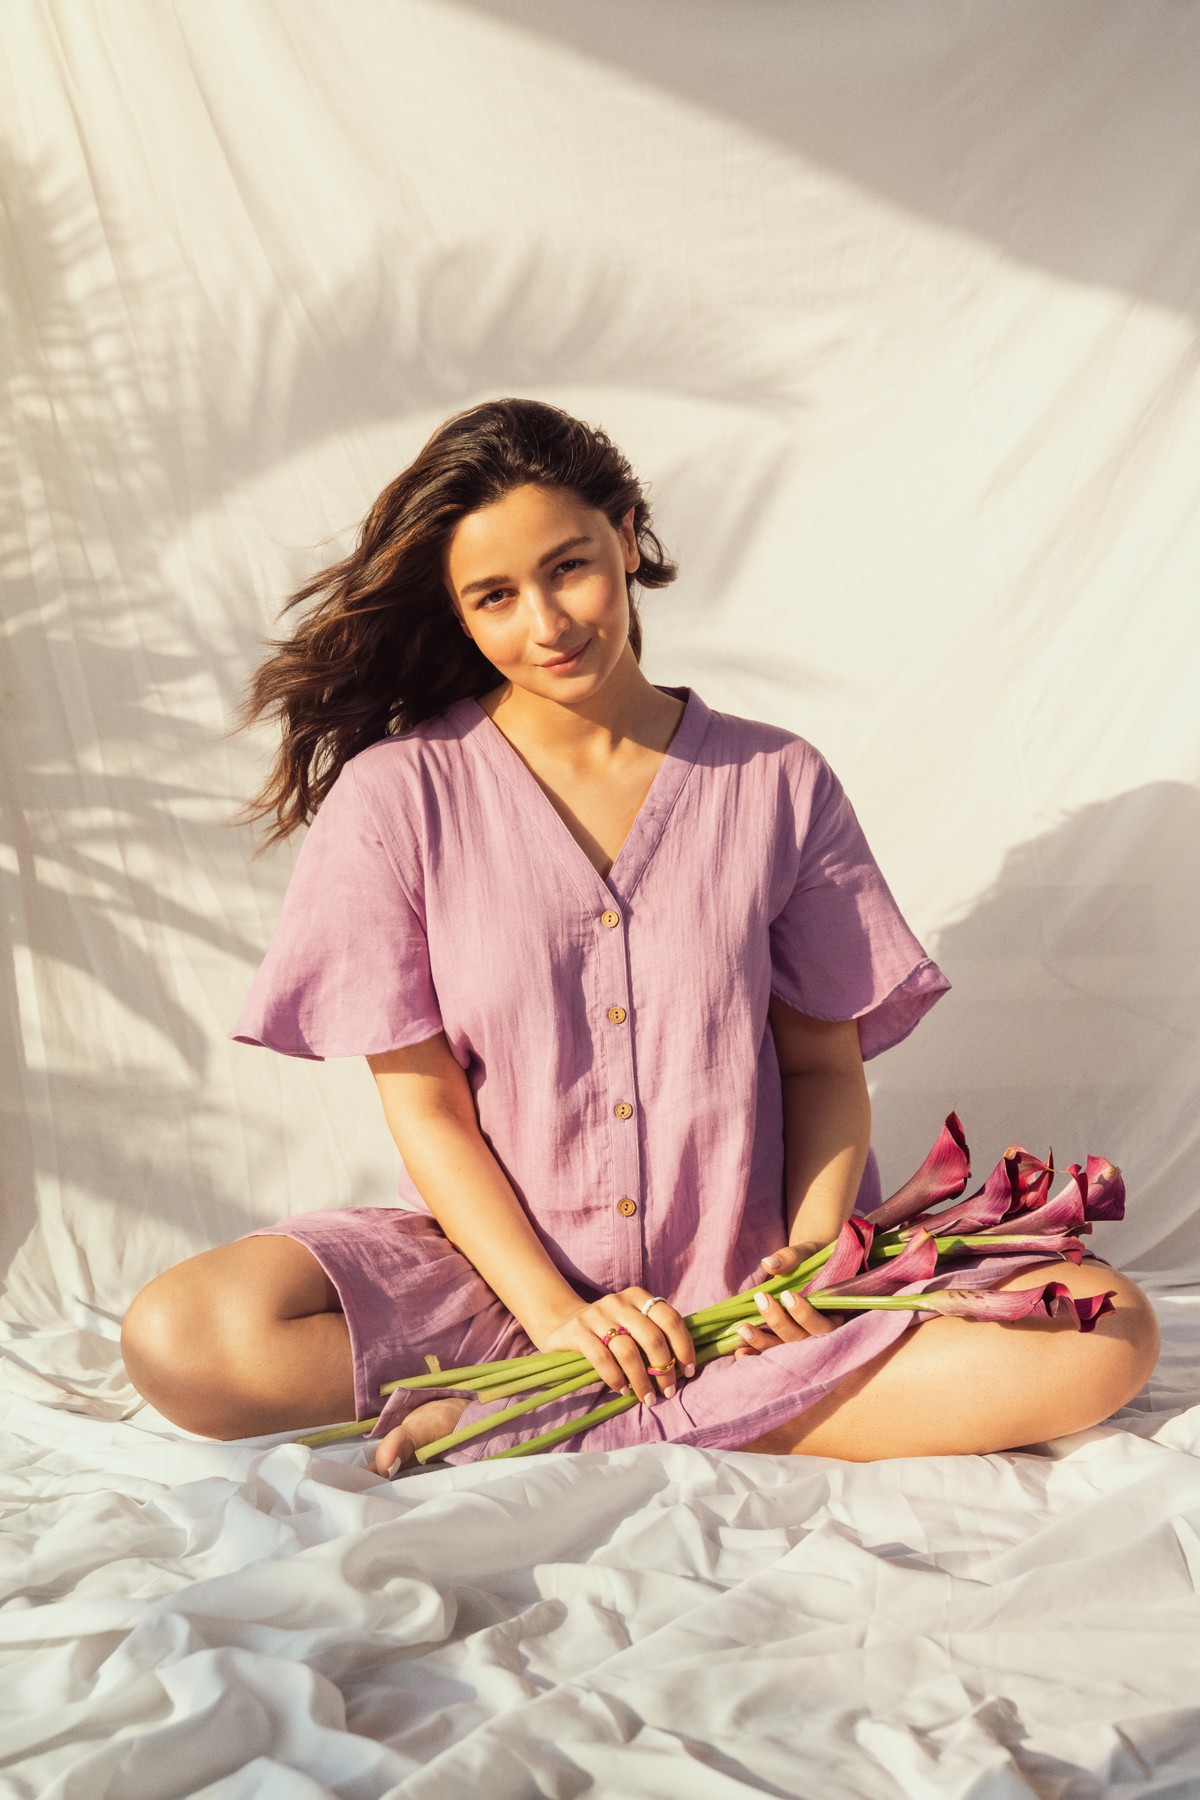 Alia Bhatt Xxx Bf 4g - Why Love Dictates Life For Bollywood's Finest Young Superstar